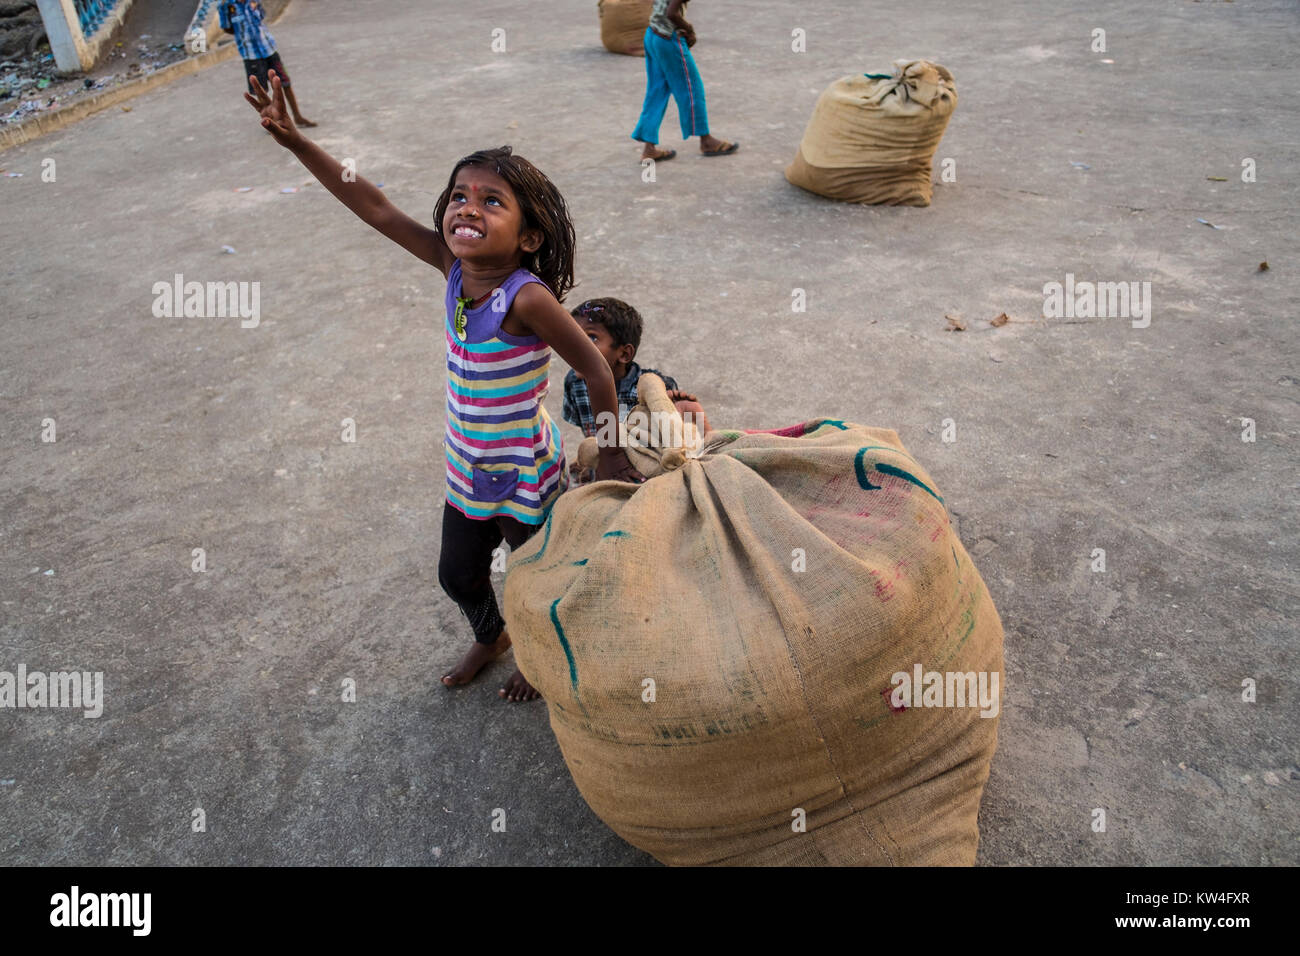 A little girl gets all excited looking at a airplane flyimng overhead as she manages a large gunny sack of dried fish. Stock Photo